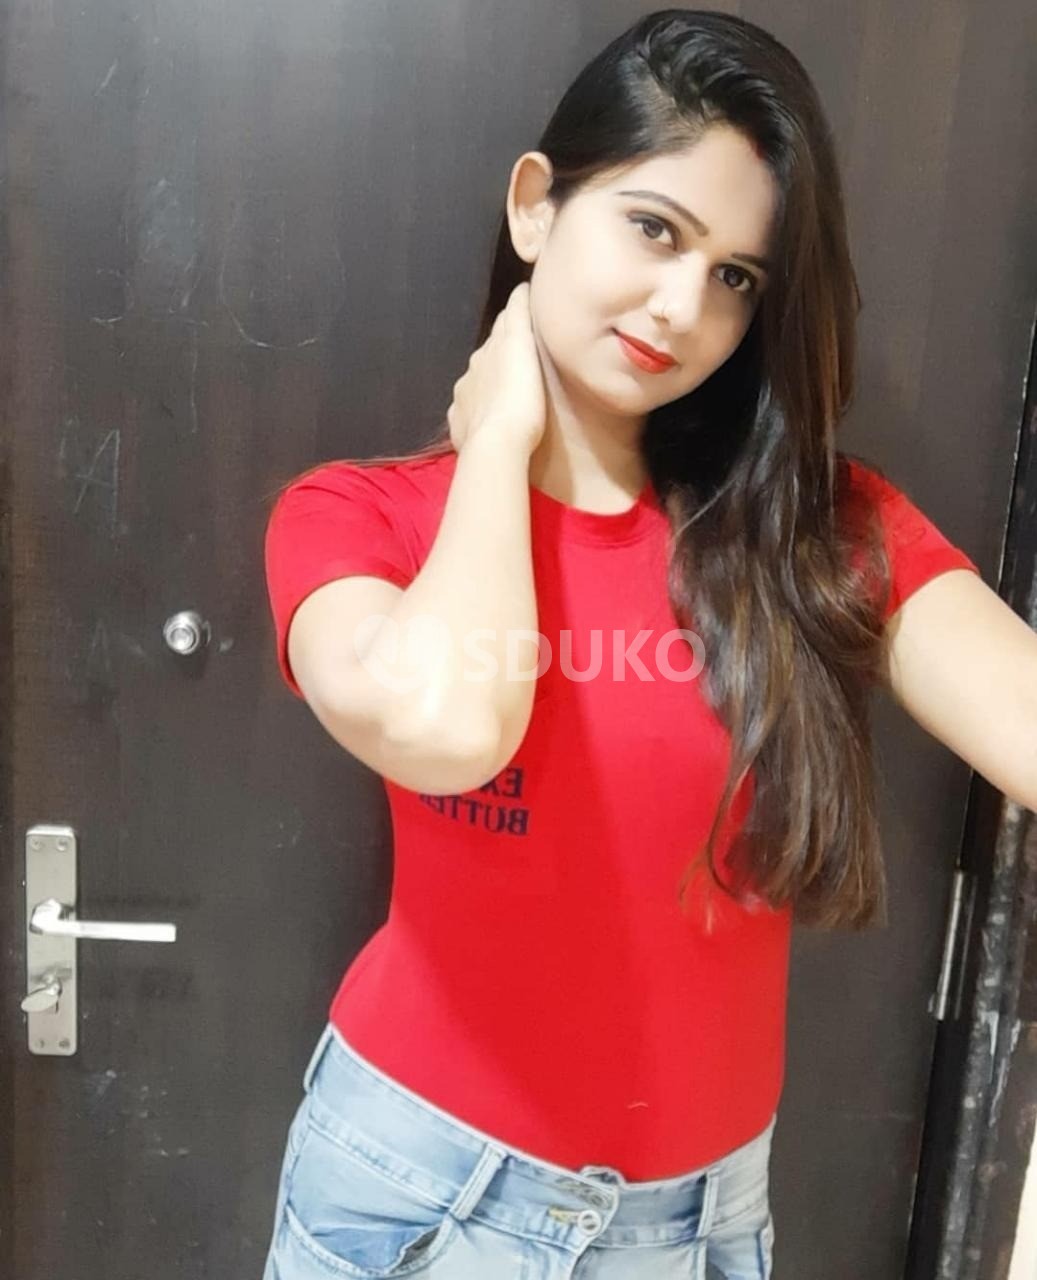 Faridabad ☎️ VIP LOW RATE (Kavya) ESCORT FULL HARD FUCK WITH NAUGHTY IF YOU WANT TO FUCK MY PUSSY WITH BIG BOOBS GIR